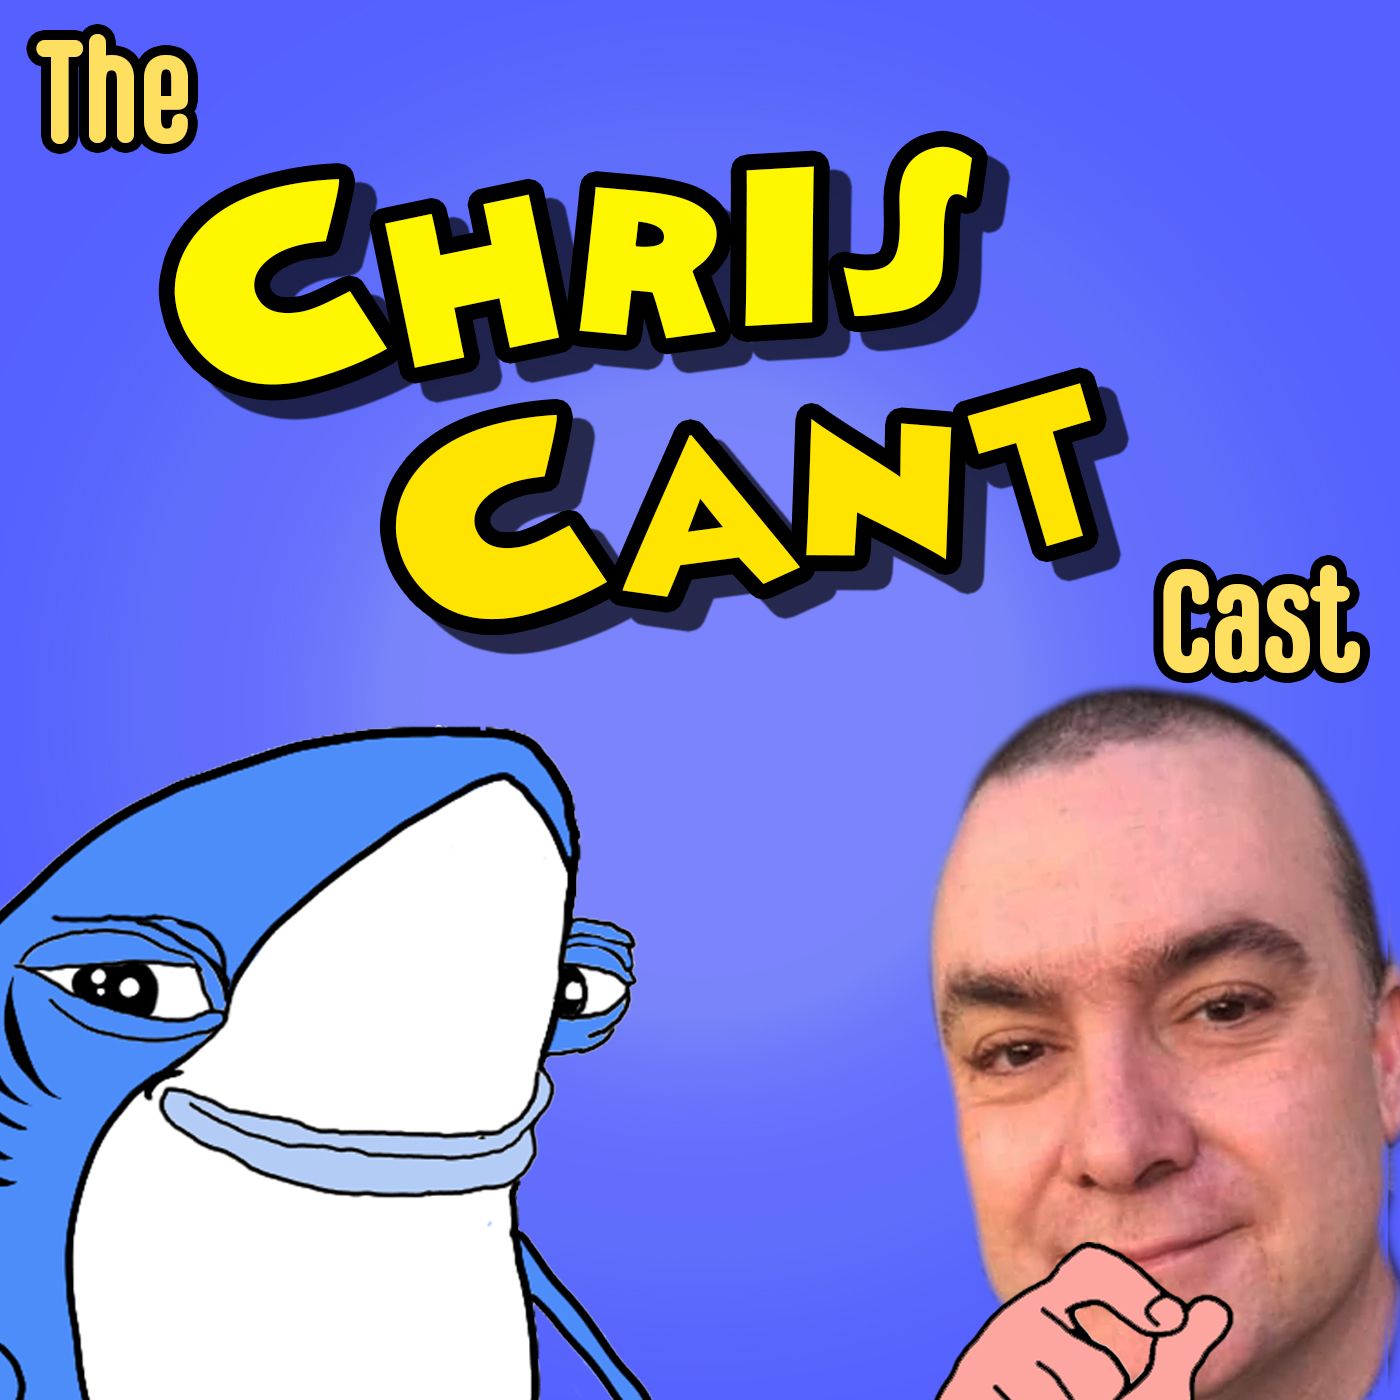 The Chris Cant Cast